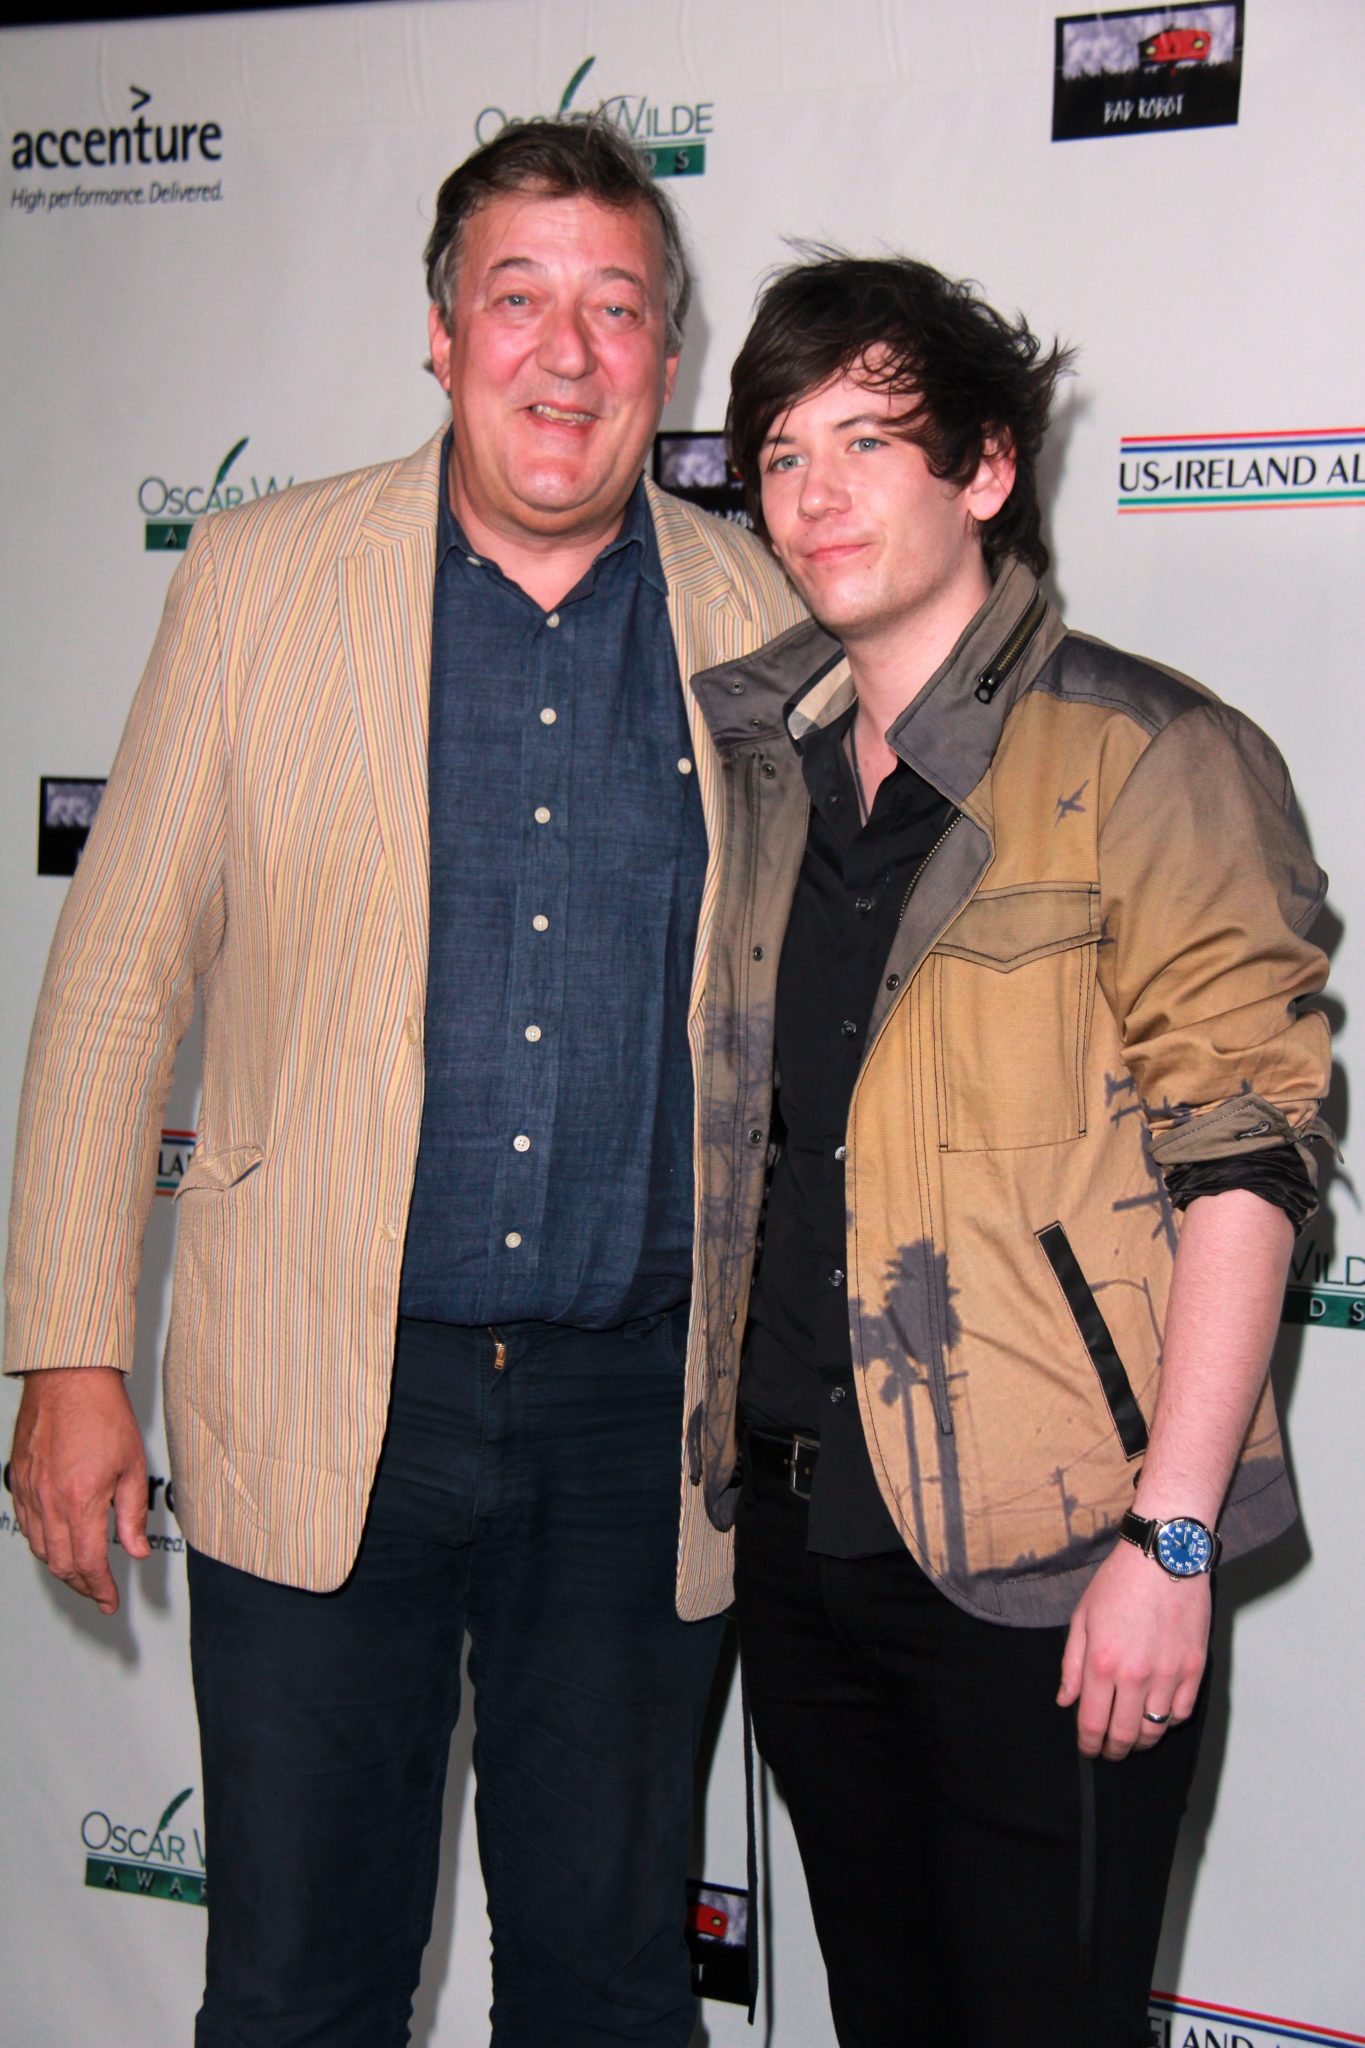 What’s the age difference between Stephen Fry and his husband